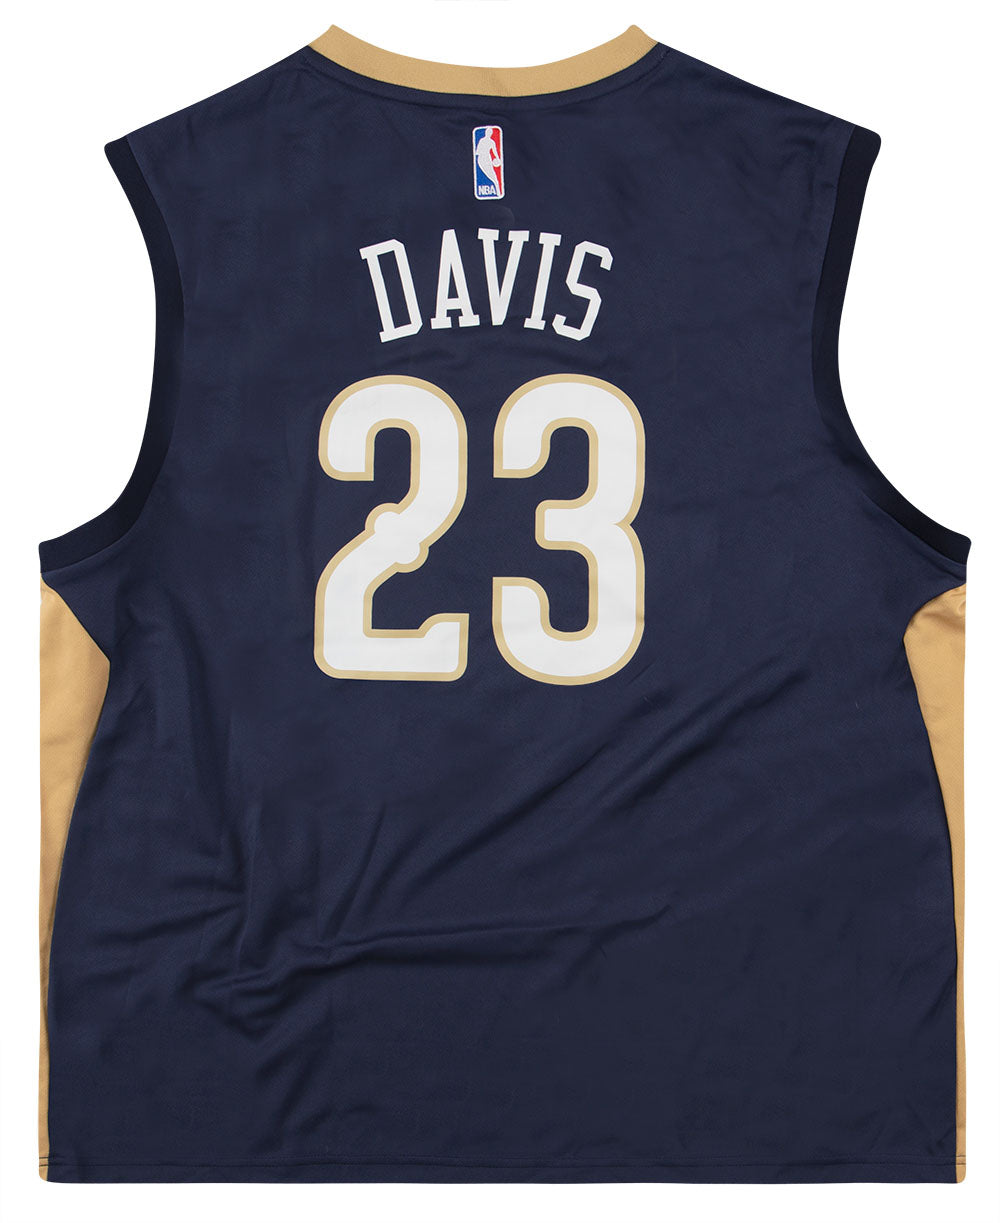 2014-17 NEW ORLEANS PELICANS DAVIS #23 ADIDAS JERSEY (AWAY) XL - W/TAG -  Classic American Sports